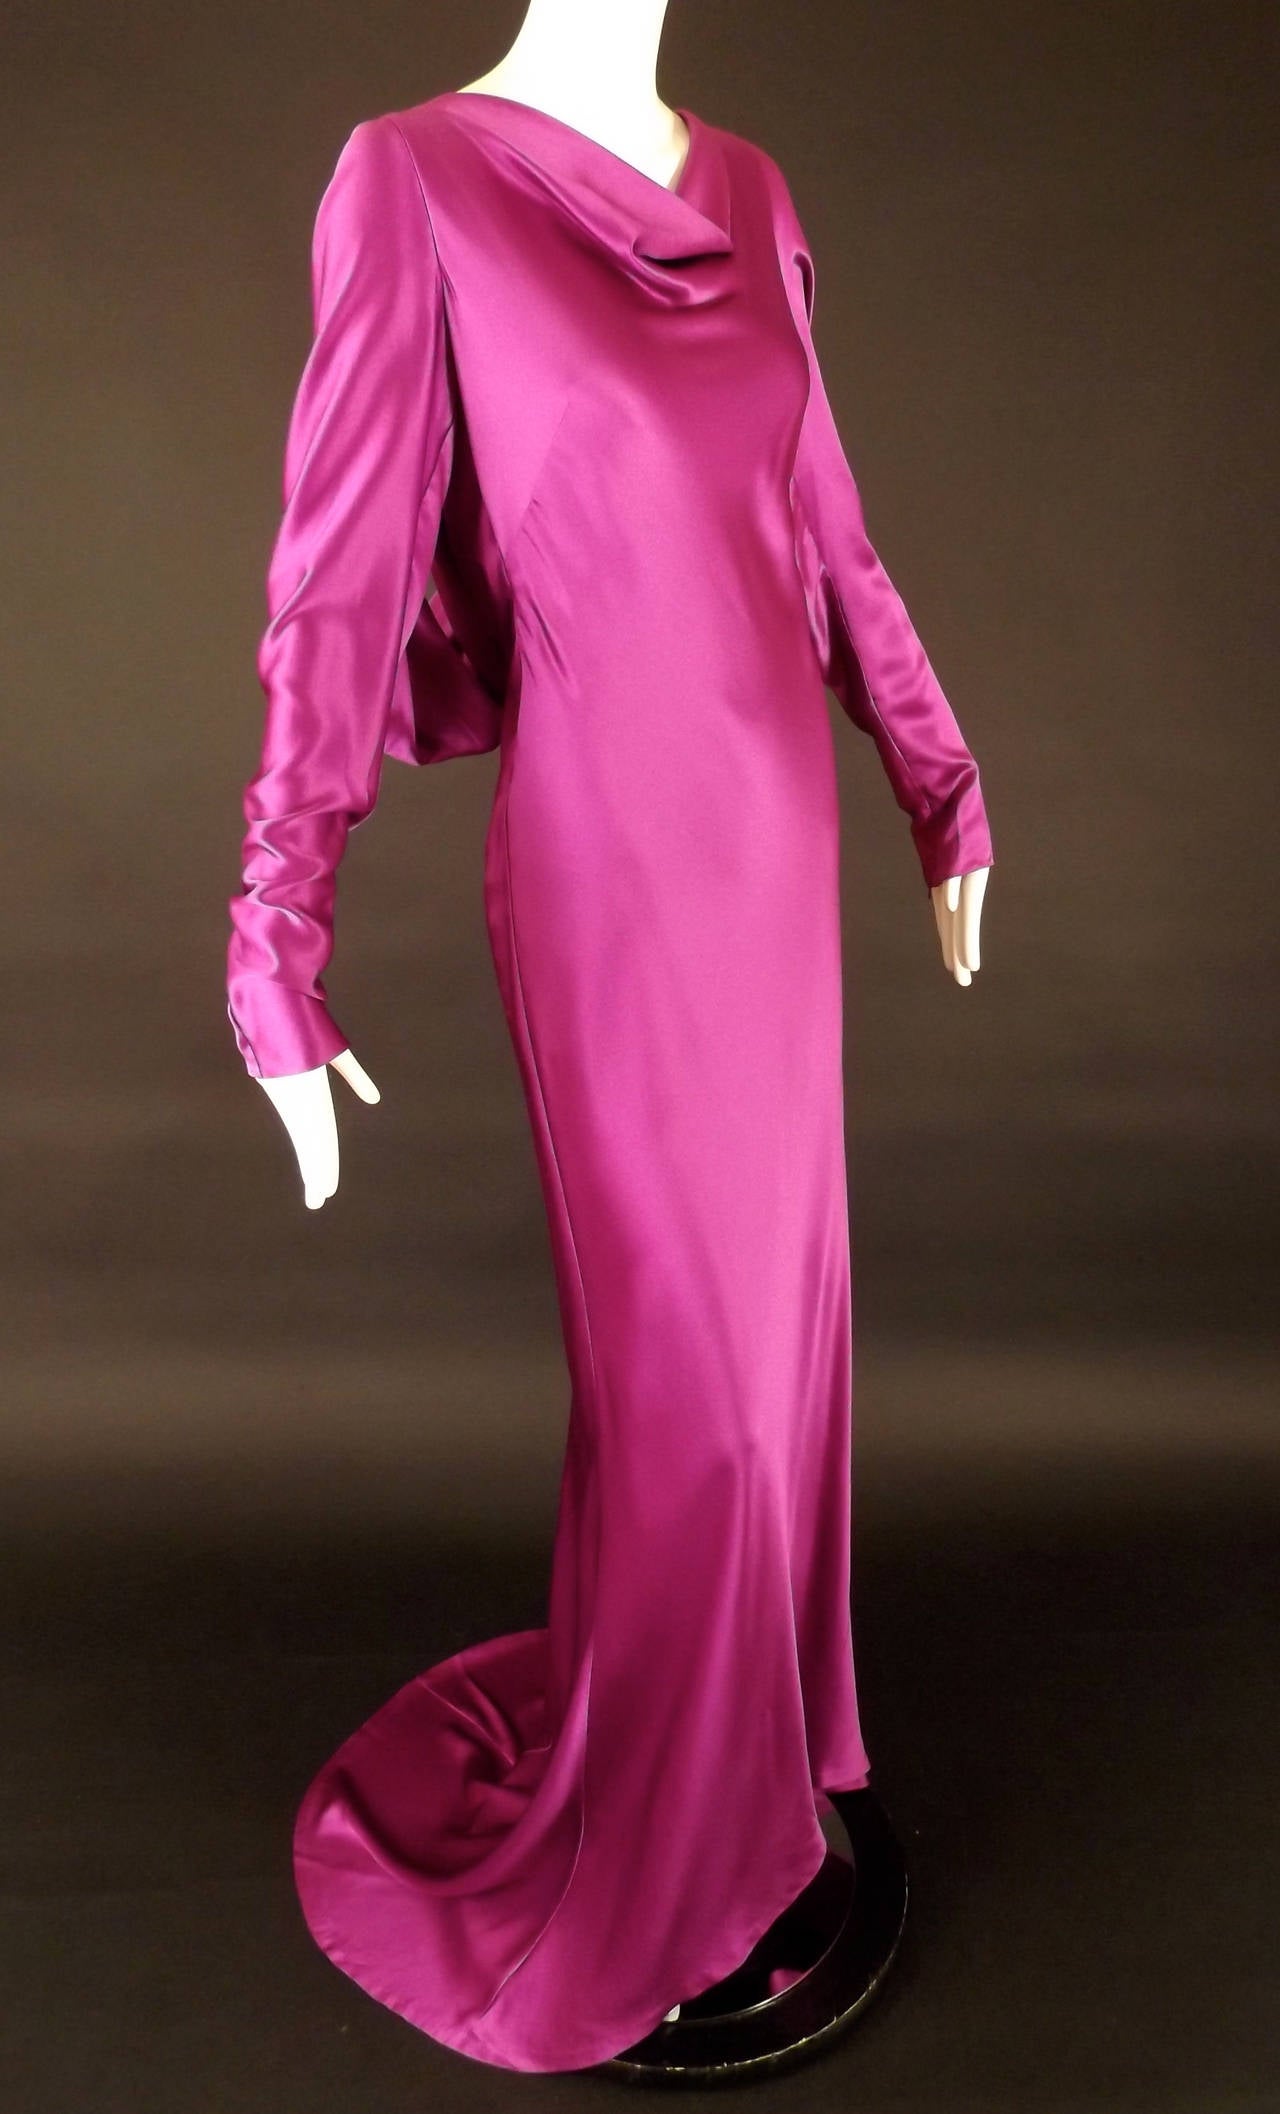 2007 Evening gown in a gorgeous raspberry silk crepe back satin.  The gown has a draped neckline and diagonal bust darts from the side seams. Long, set in sleeves taper to the zipper closures at the wrists.  Only a true designer (and pattern maker)